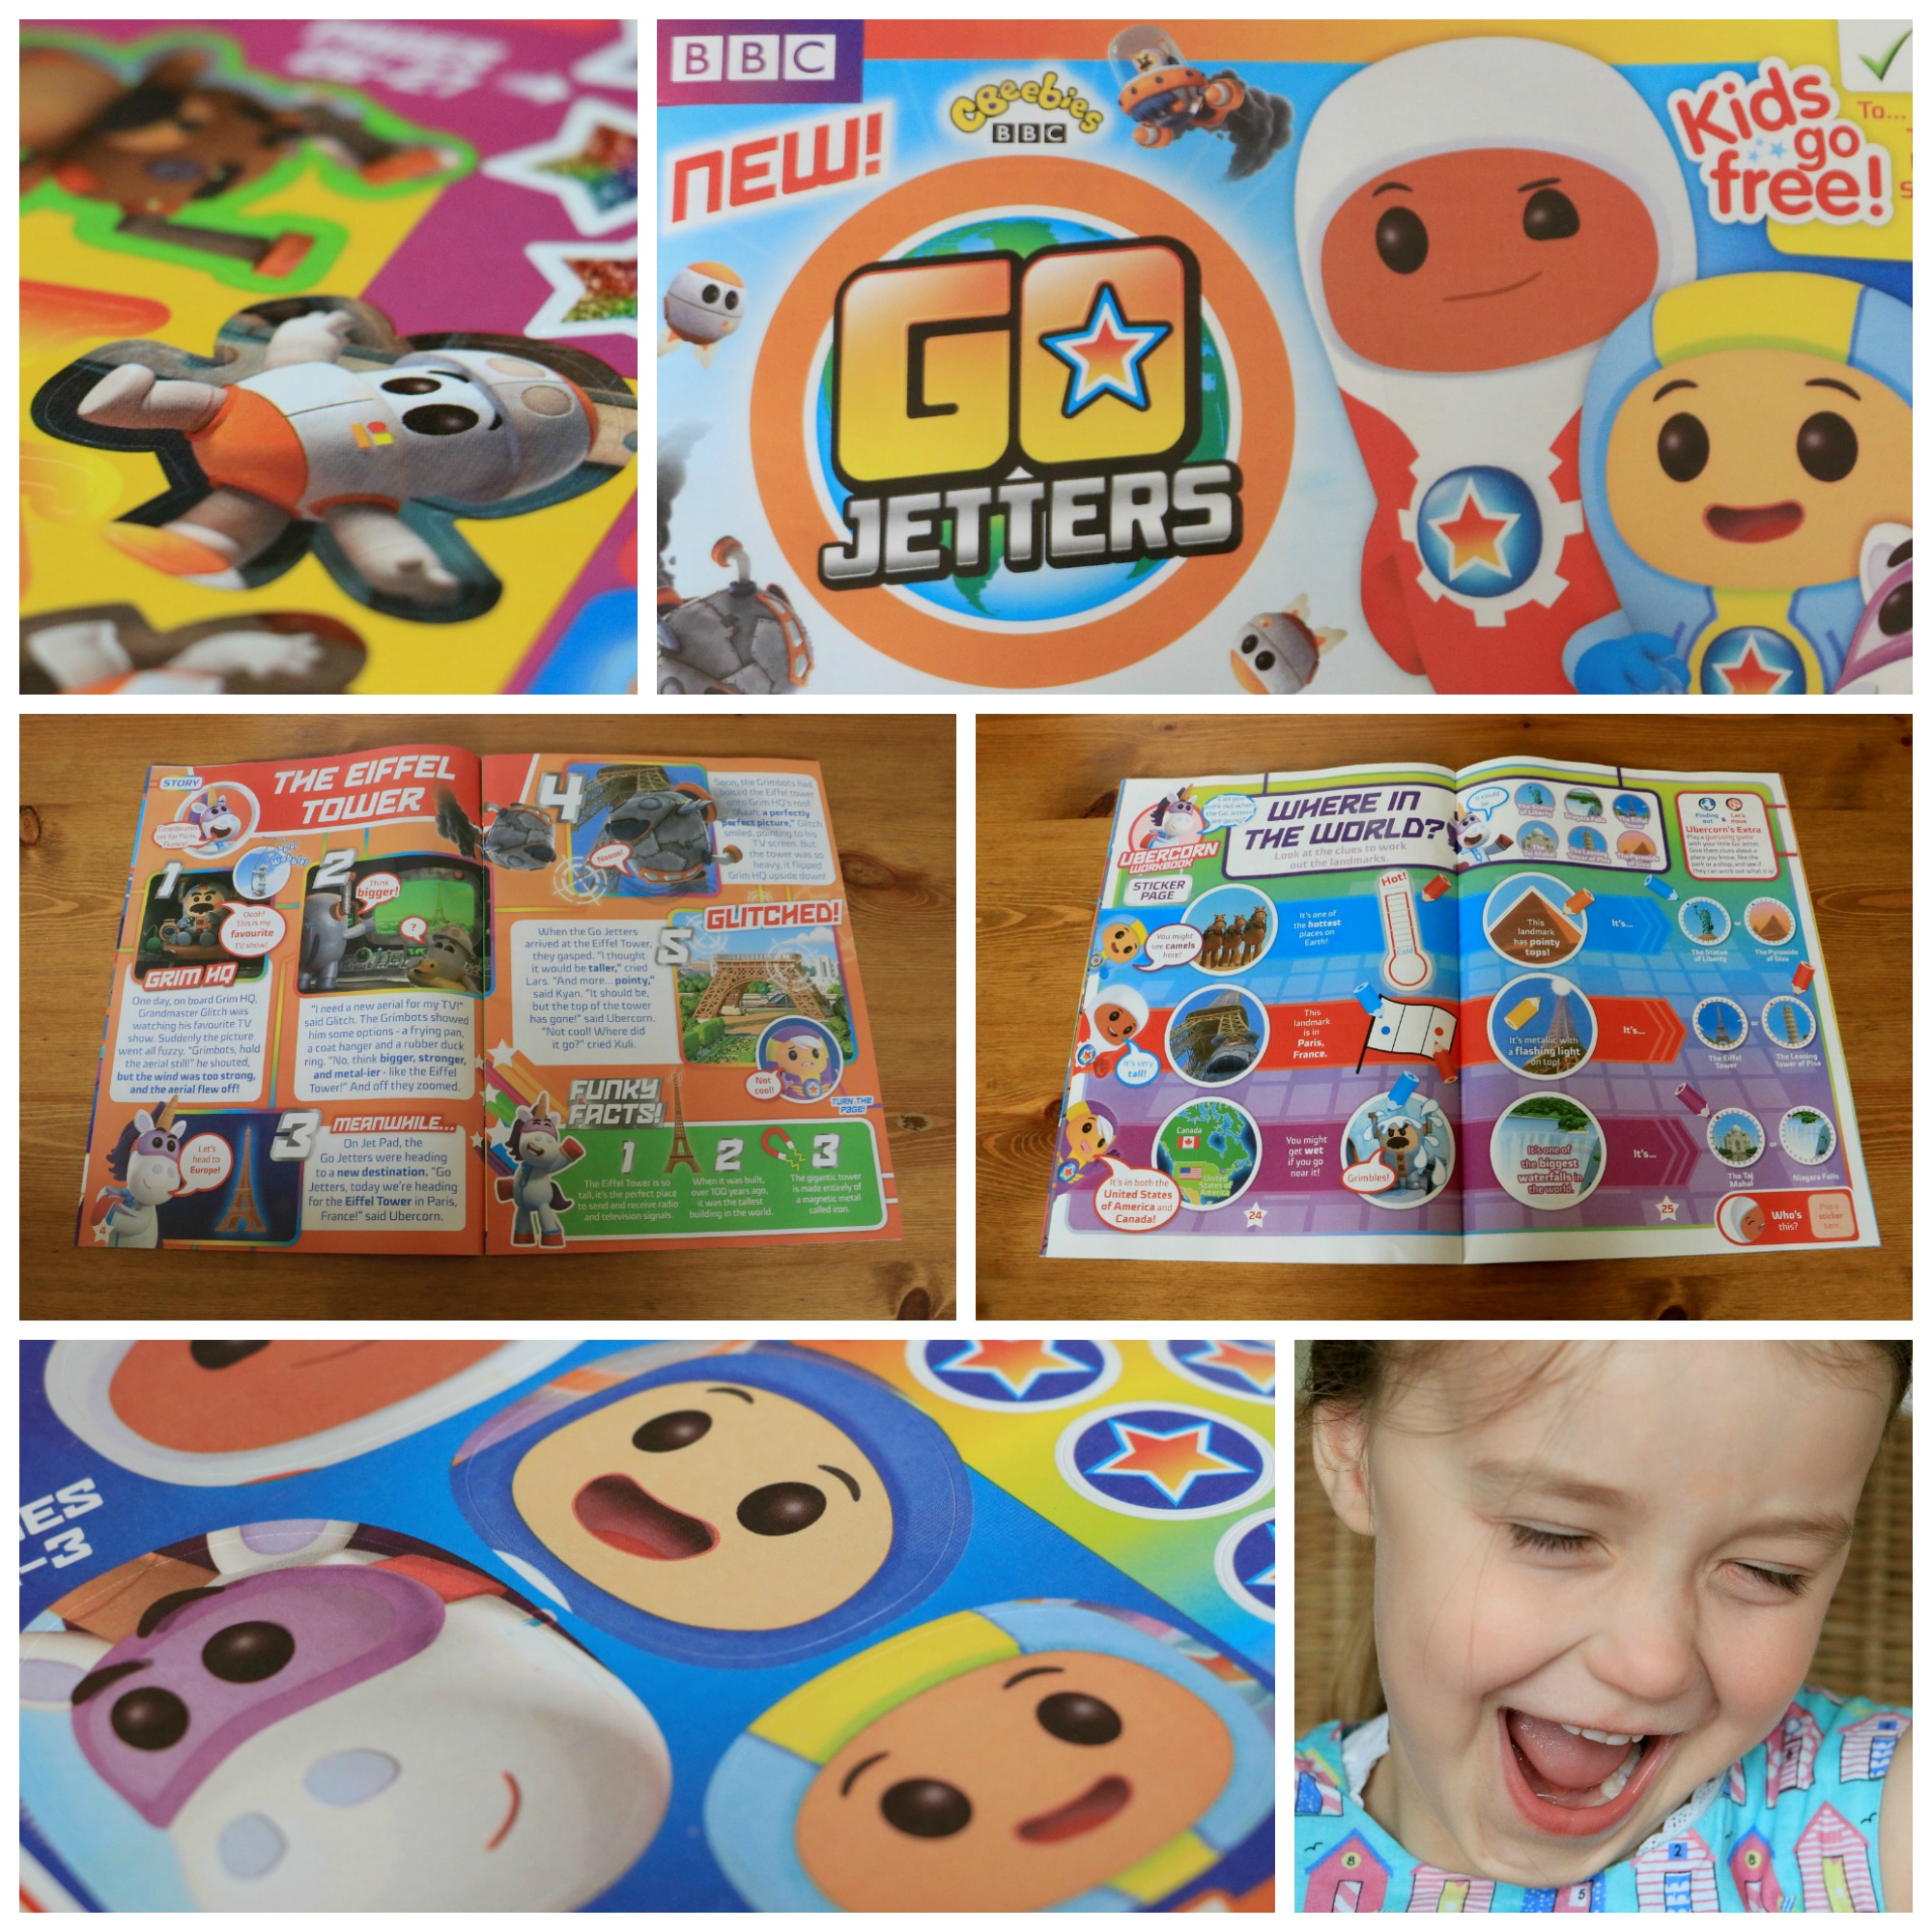 PODcast CBeebies Go Jetters collage 3